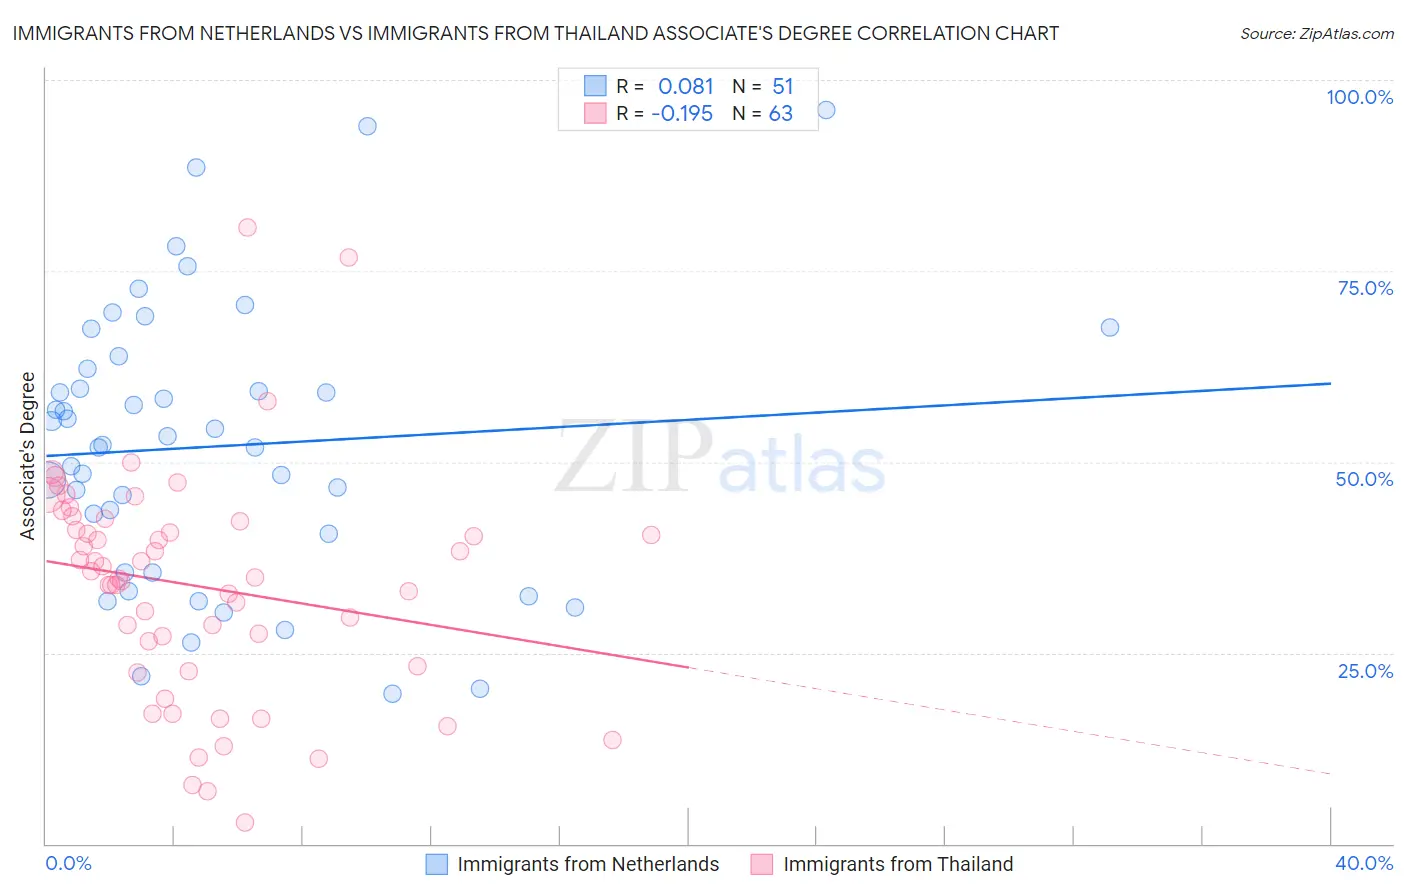 Immigrants from Netherlands vs Immigrants from Thailand Associate's Degree